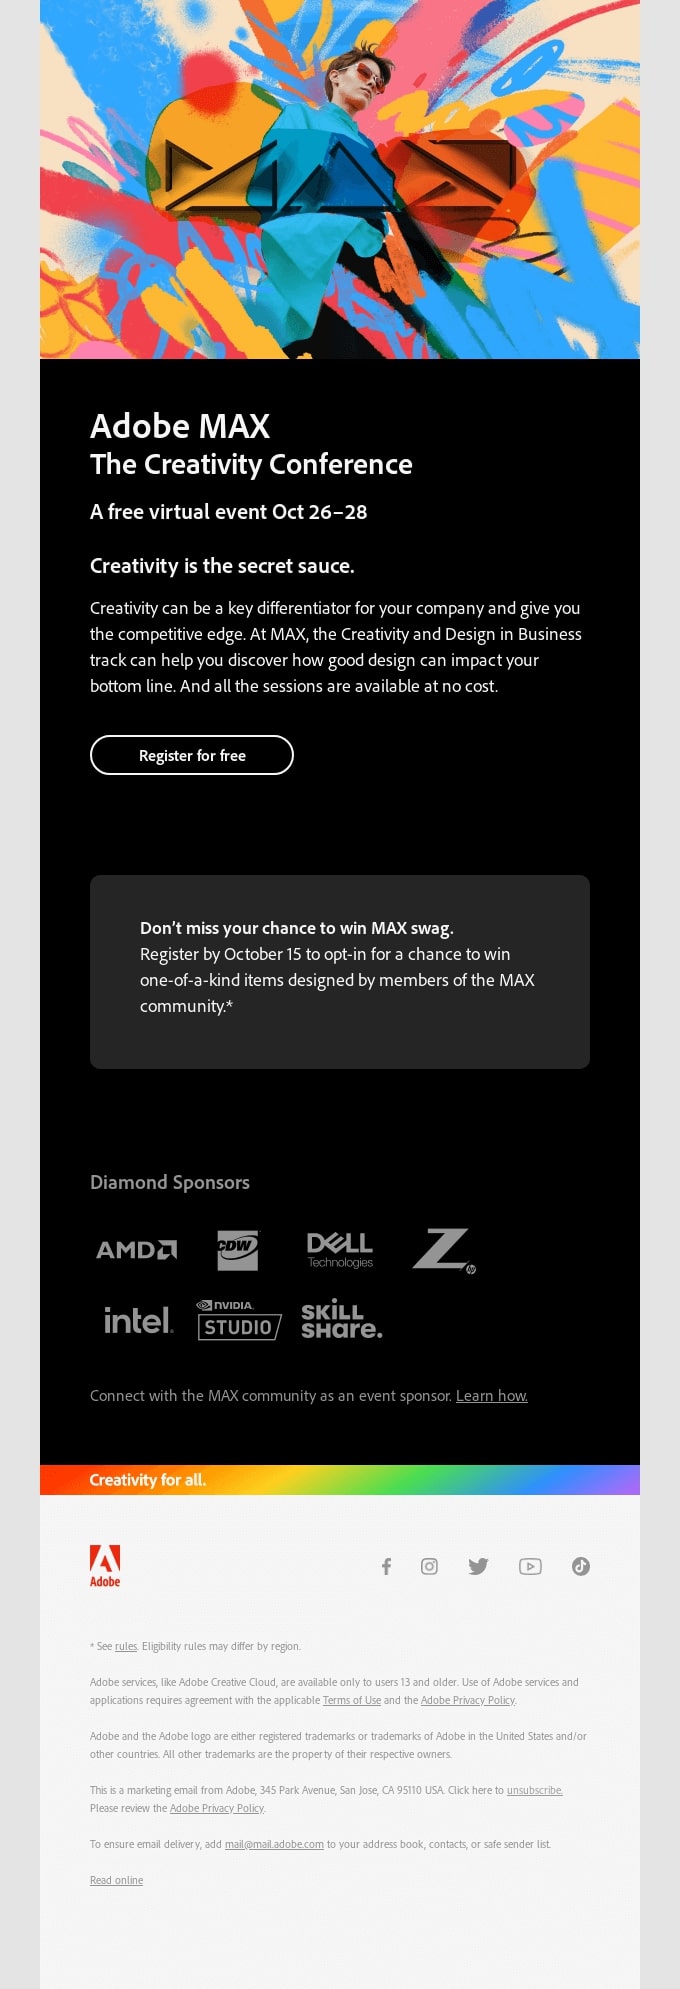 Event Promotion Email Example Adobe